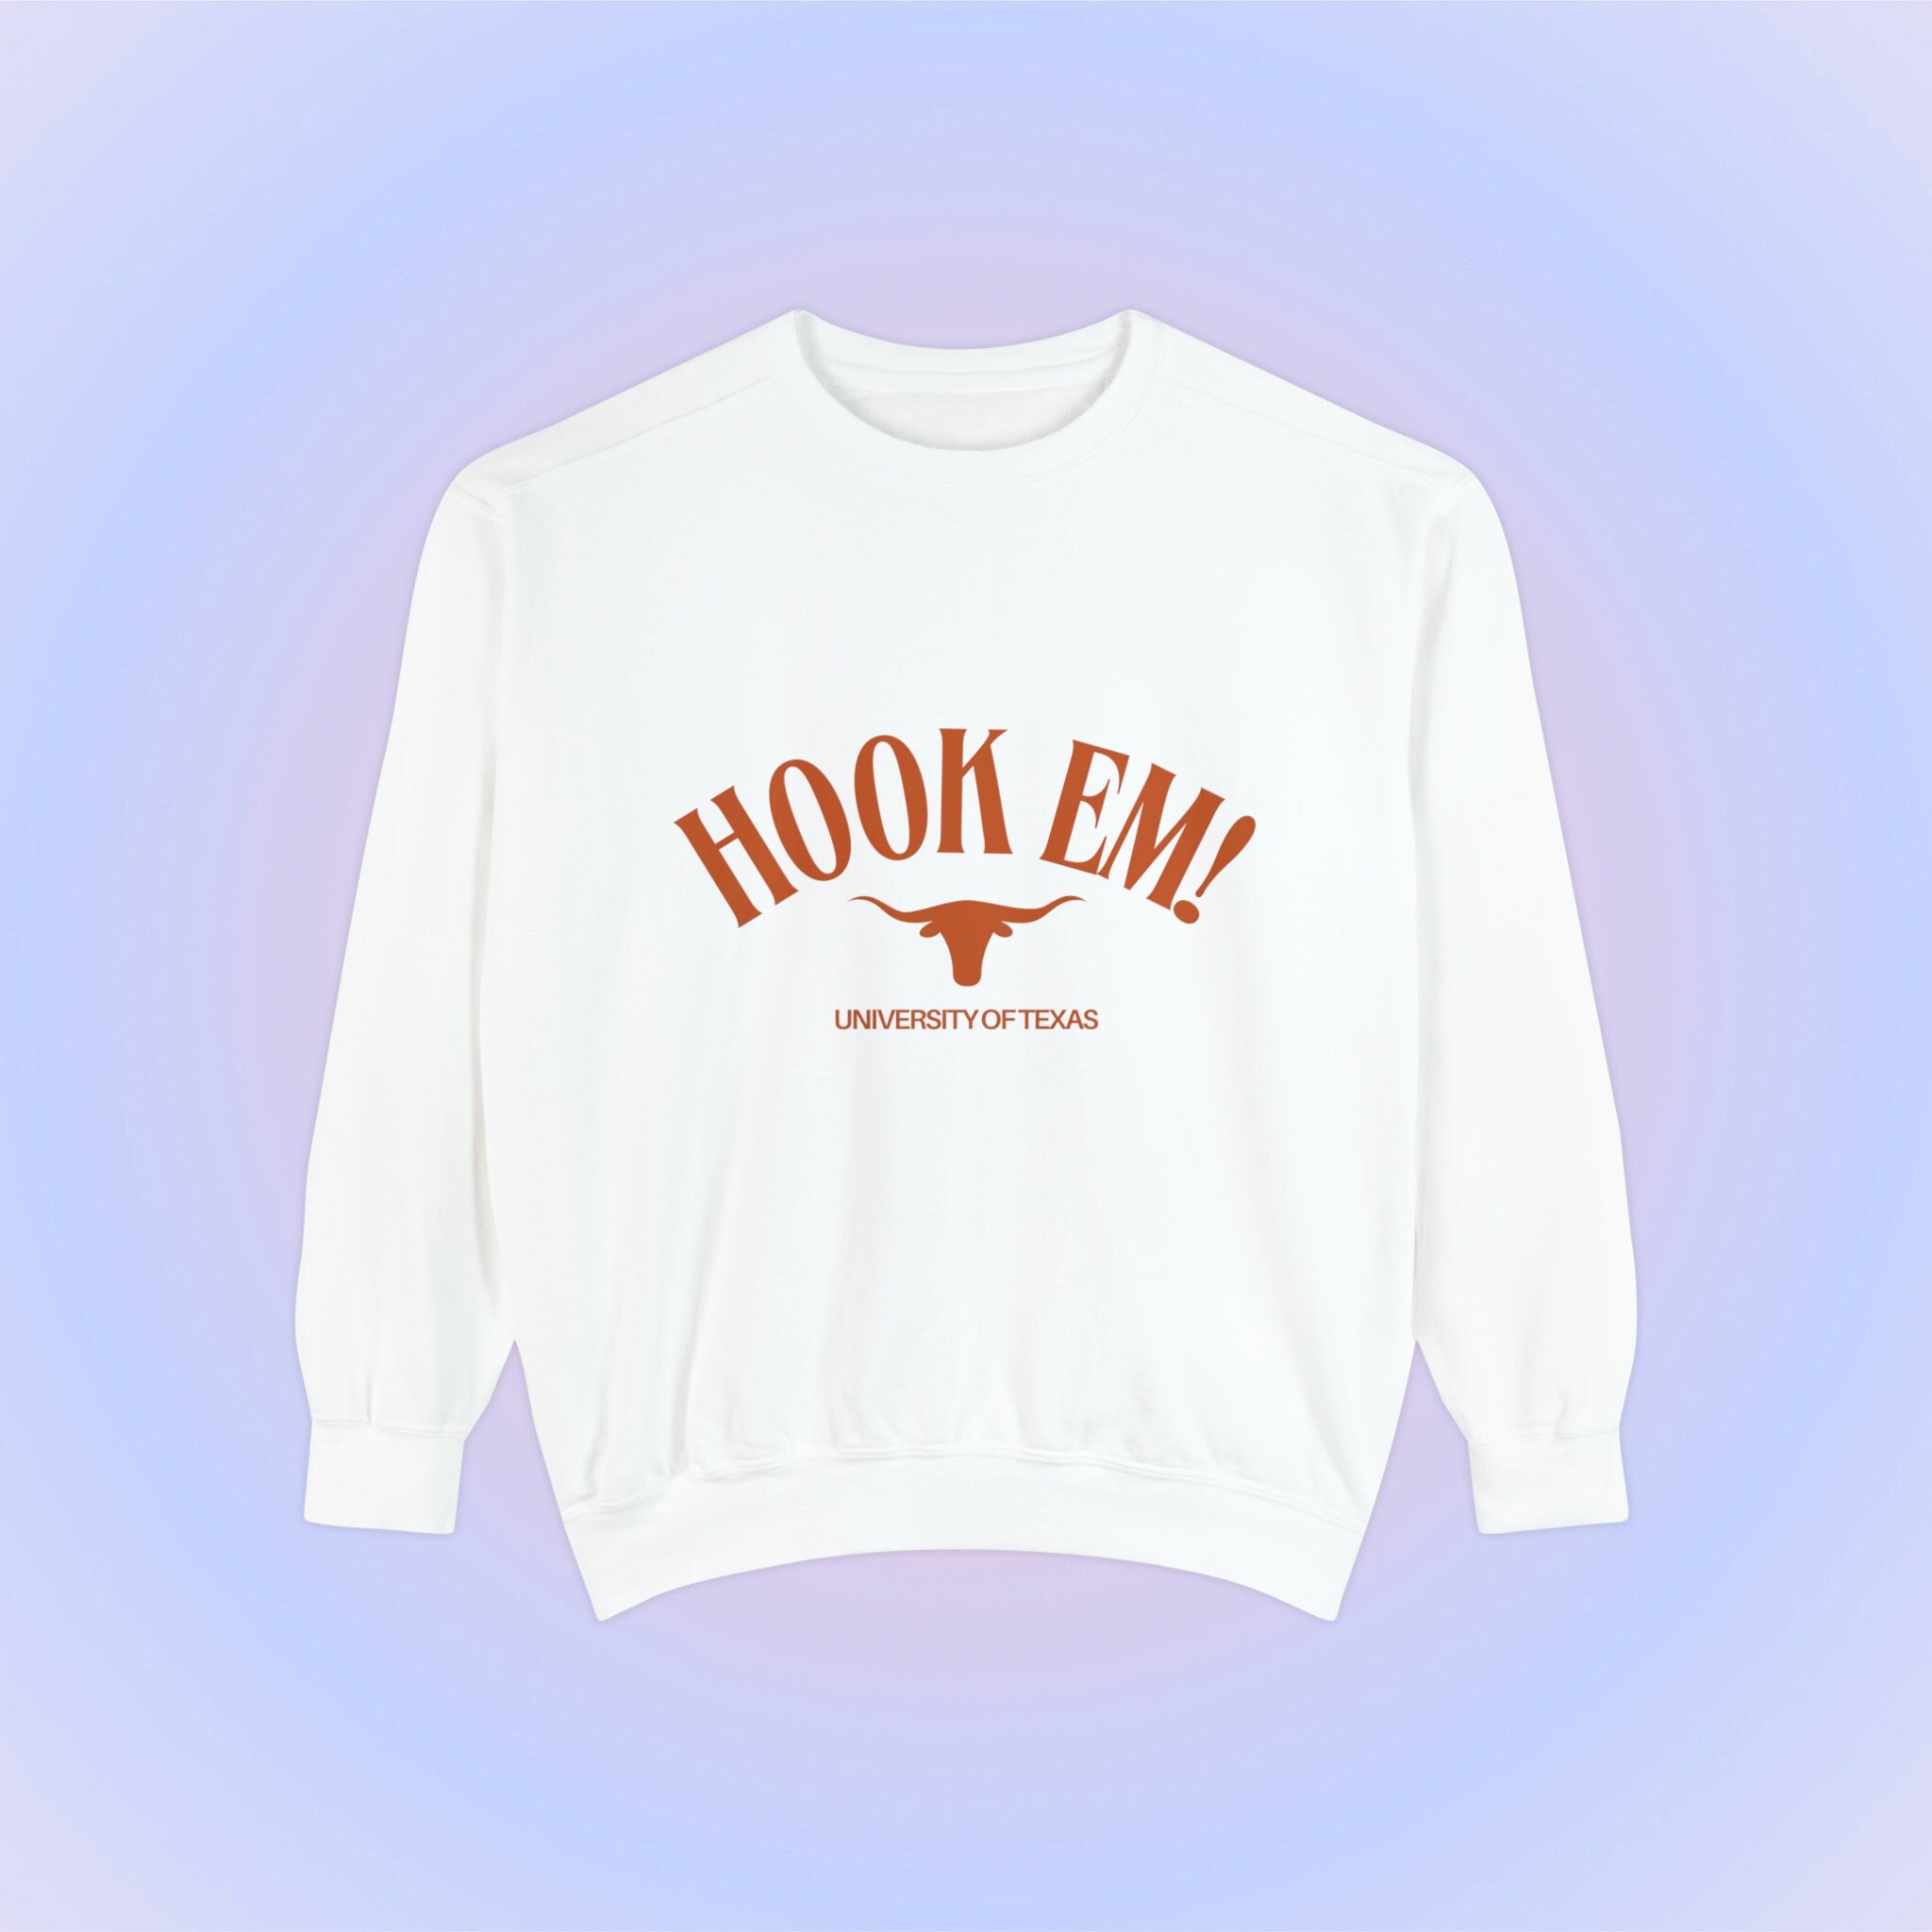 TEXAS BASKETBALL HOOK 'EM T-shirt - Print your thoughts. Tell your stories.